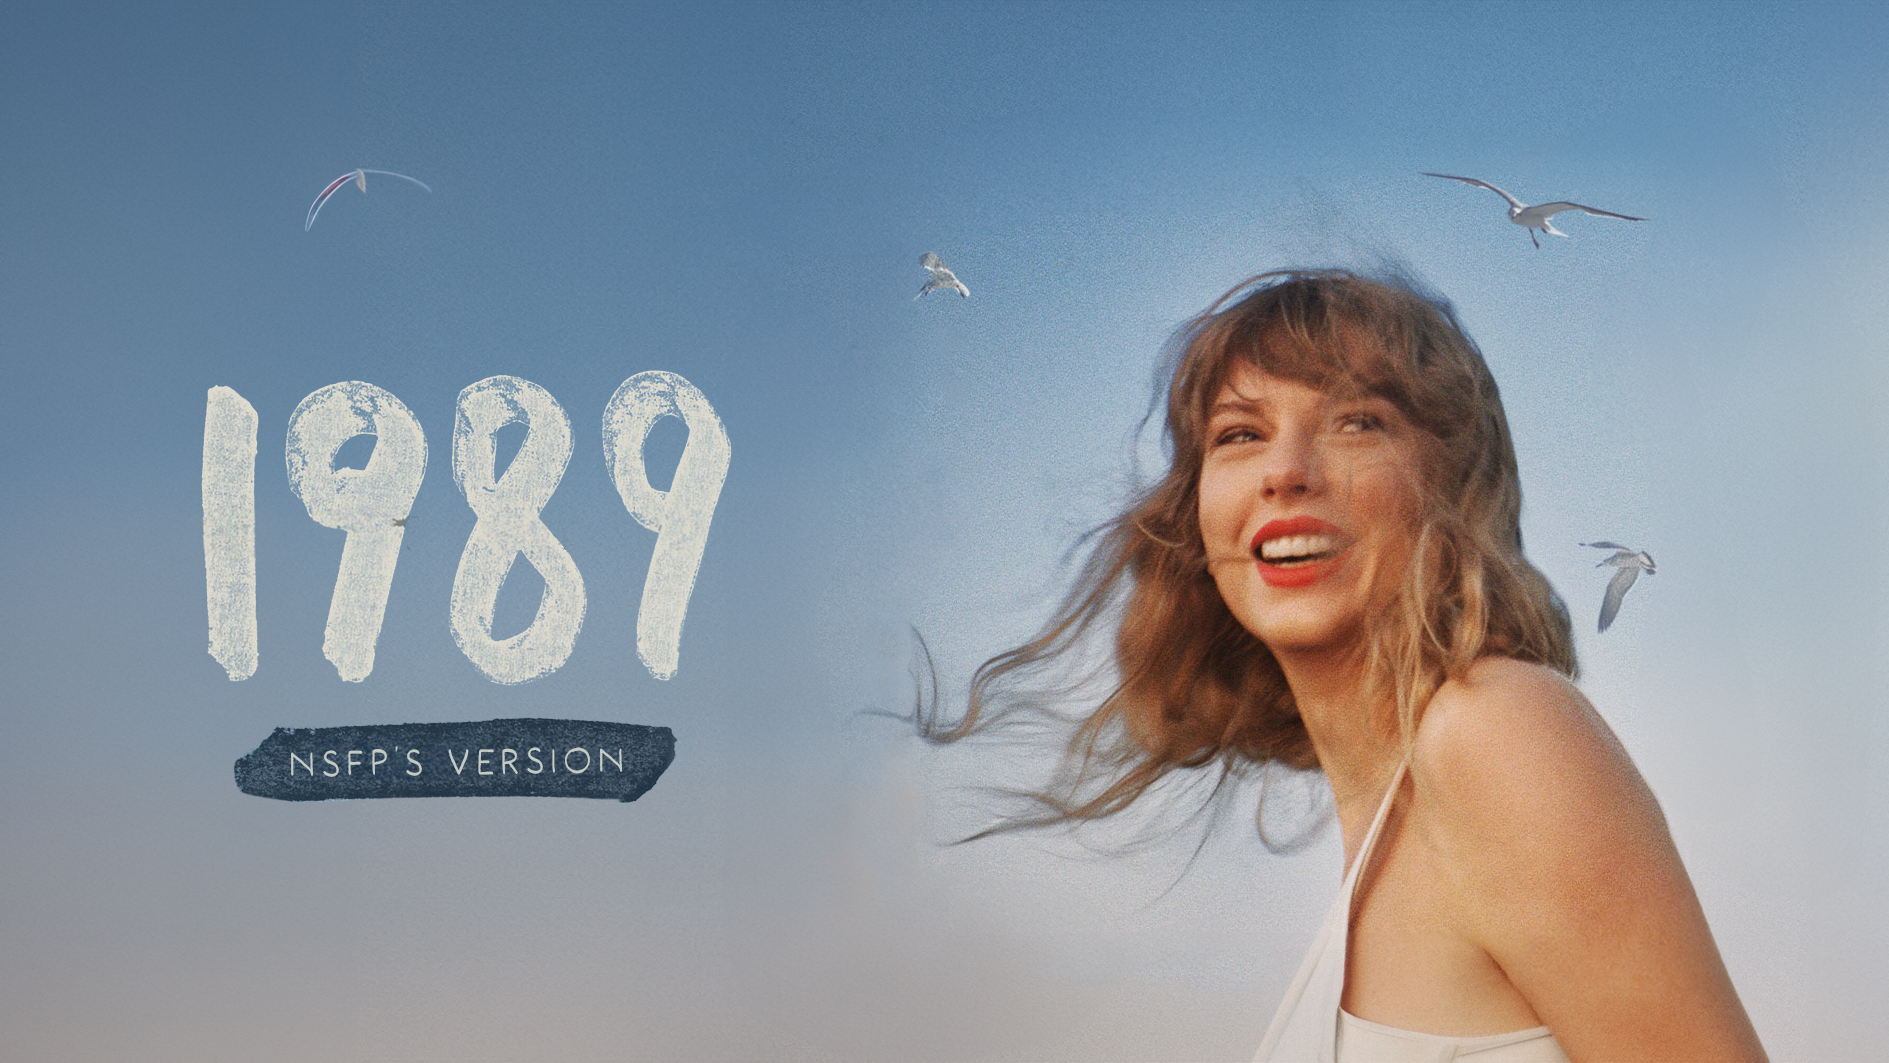 Taylor Swift on sky background with “1989 NSFP’s Version” written.